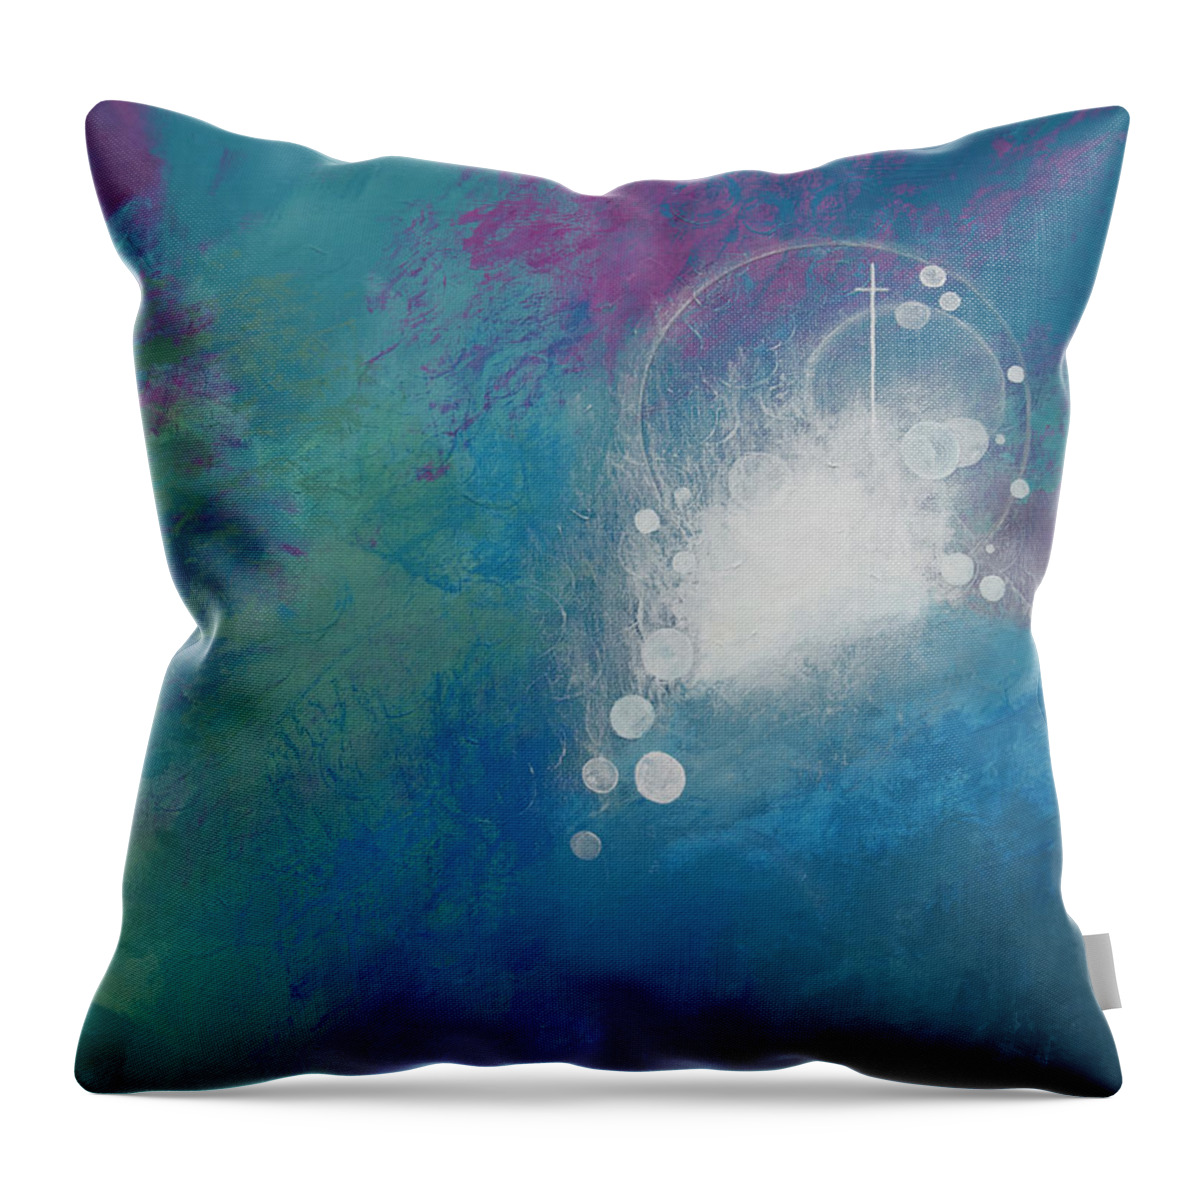 Holy Spirit Throw Pillow featuring the painting Look Up by Linda Bailey